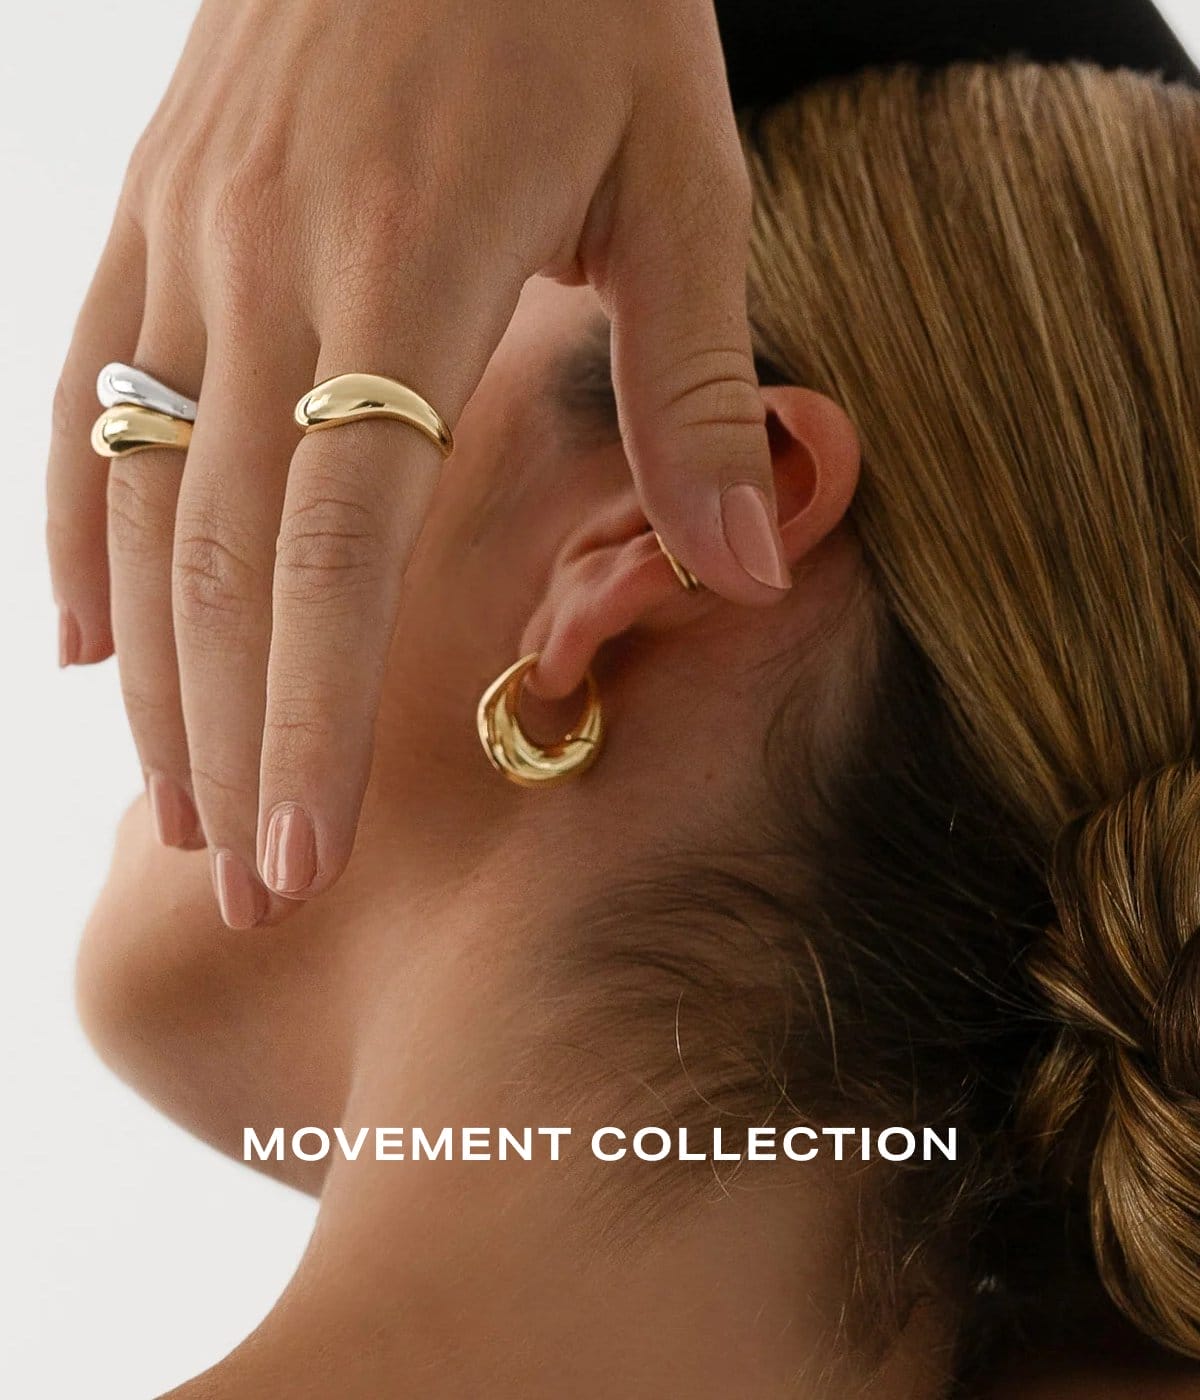 Movement Collection